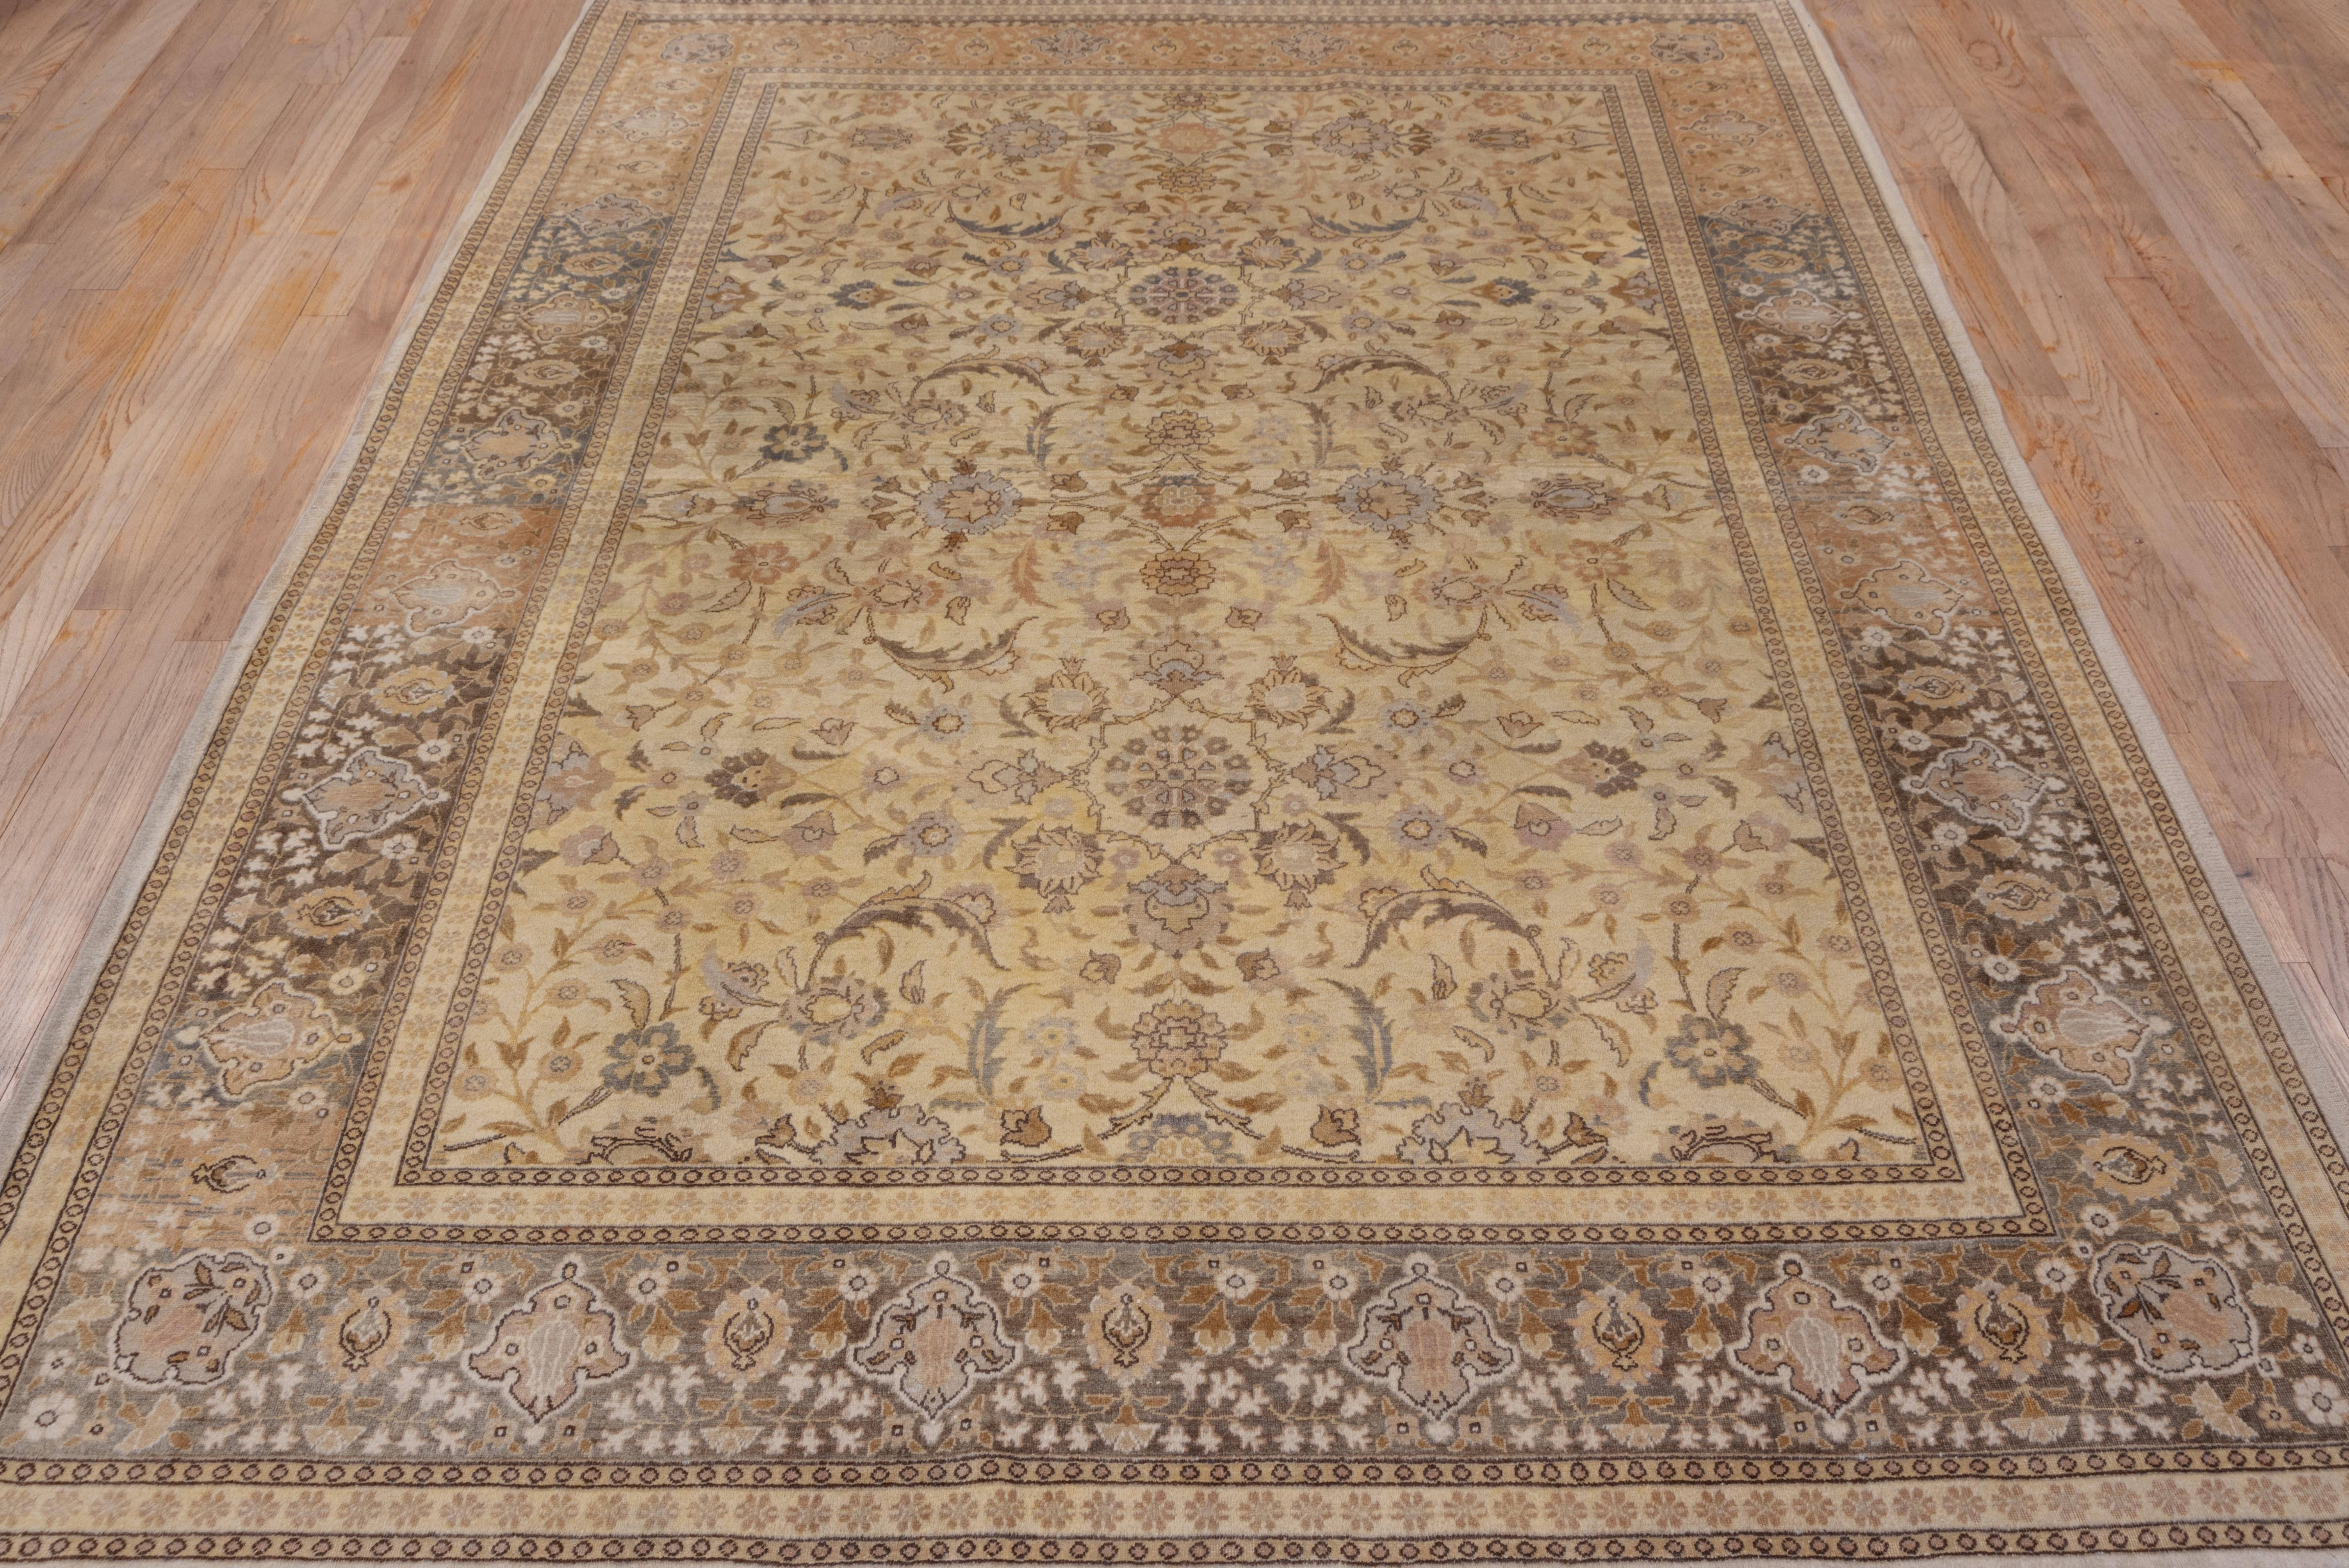 This finely woven eastern Turkish city rug features a sandy ivory field with open octogrammes enclosing complex rosettes, various palmettes and vigorous leaves. The well-abrashed green border displays escutcheon palmettes and hyacinth sprays. The